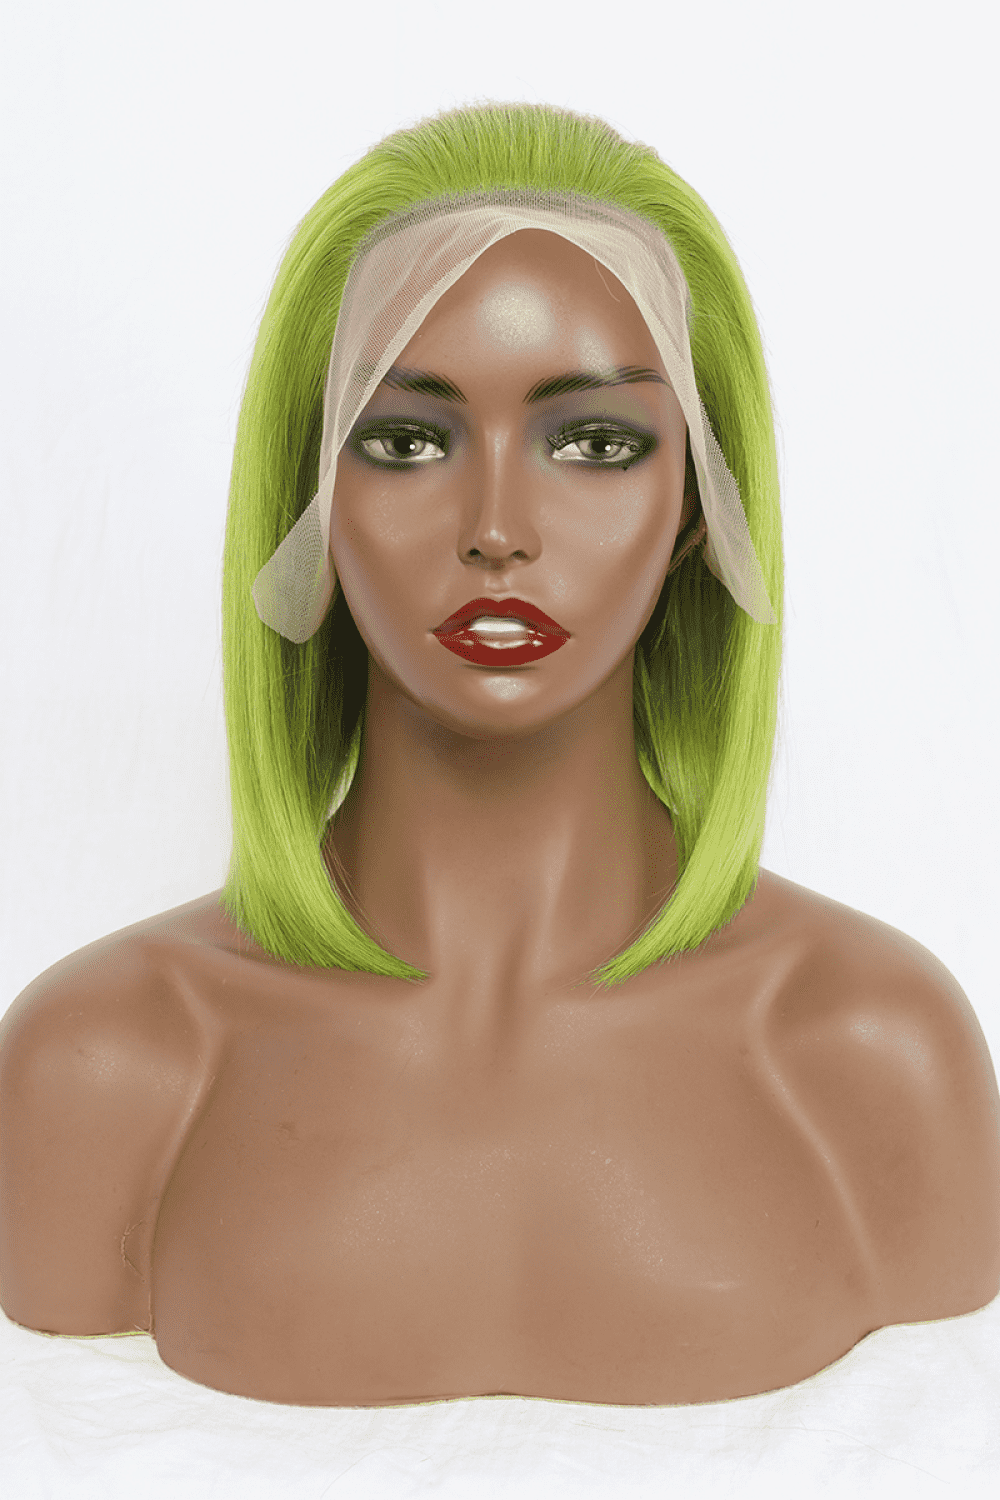 a mannequin head with a green wig